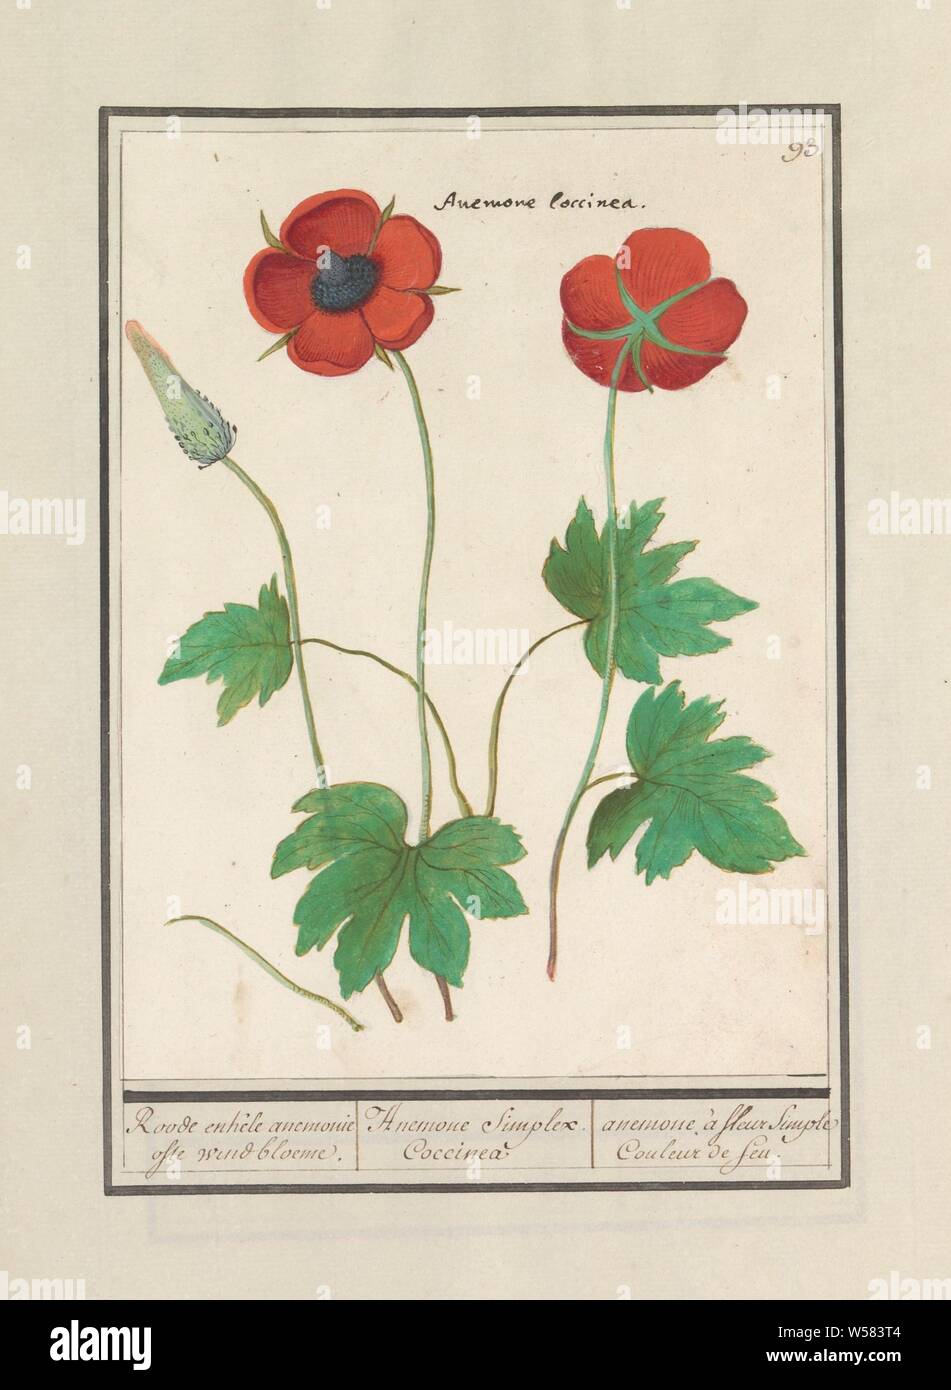 Anemone (Anemone), Roode single anemony or wind flower. / Anemone Simplex Coccinea. / anemones à fleur Simple Couleur de feu. (title on object), Red anemone. Numbered top right: 93. With the Latin name. Part of the first album with drawings of flowers and plants. Eighth of twelve albums with drawings of animals, birds and plants known around 1600, commissioned by Emperor Rudolf II. With explanations in Dutch, Latin and French, flowers: anemone, Anselmus Boetius de Boodt, 1596 - 1610, paper, watercolor (paint), deck paint, chalk, ink, pen, h 218 mm × w 163 mm Stock Photo